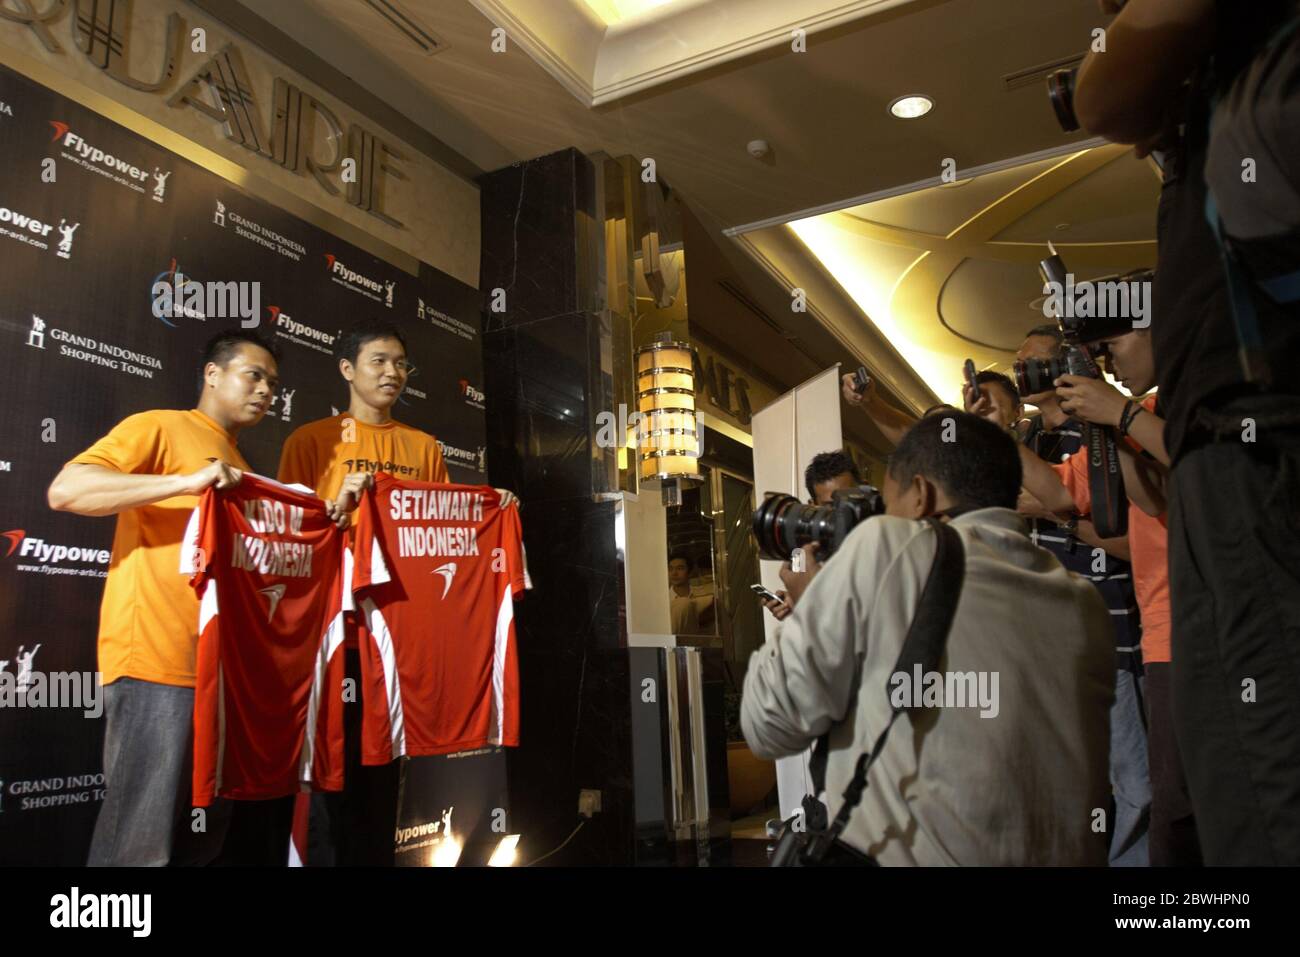 Badminton stars Markis Kido and Hendra Setiawan pose for a photo sesssion during a press conference held to introduce the mens double as the ambassadors of Flypower sports apparel brand. Archival photo (2010). Grand Indonesia mall, Jakarta, Indonesia, March 5th, 2010. Stock Photo